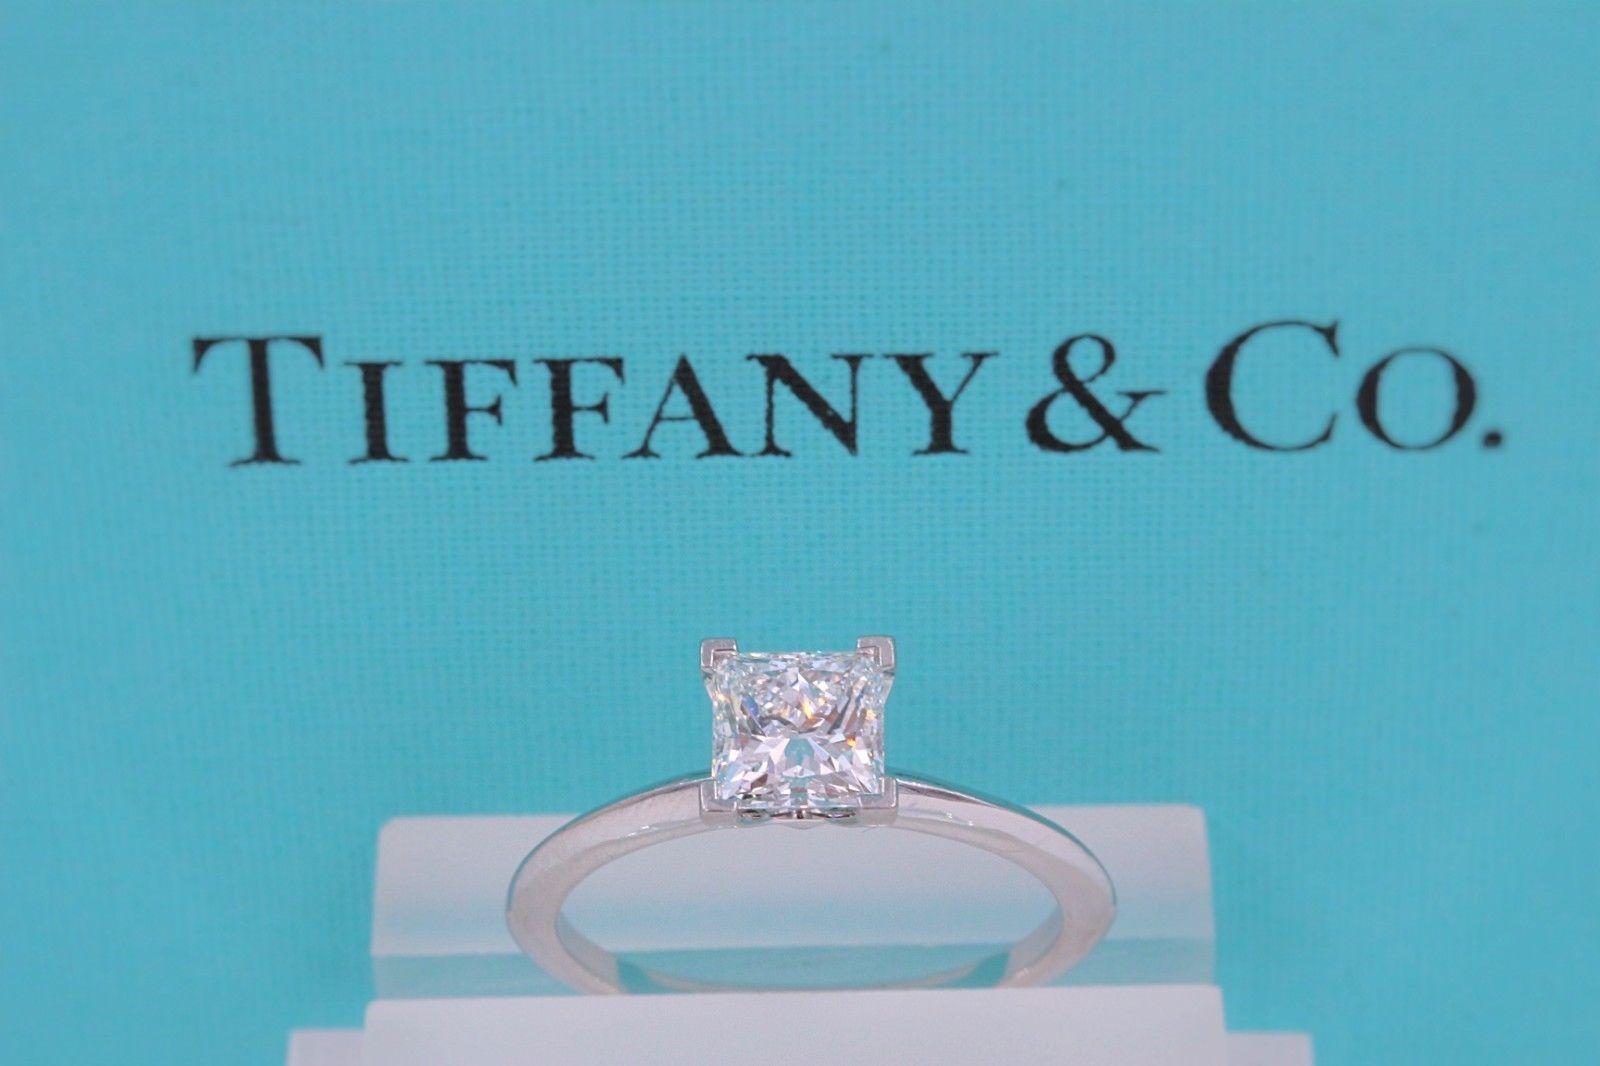 Tiffany & Co.
Style:  Solitaire
Serial Number:  T&C Diamond Certificate 6278701/S11220083
Metal:  Platinum PT950
Size:  6 - sizable
Total Carat Weight:  1.20 cts
Diamond Shape:  Princess / Square Modified Brilliant 1.20 cts
Diamond Color & Clarity: 